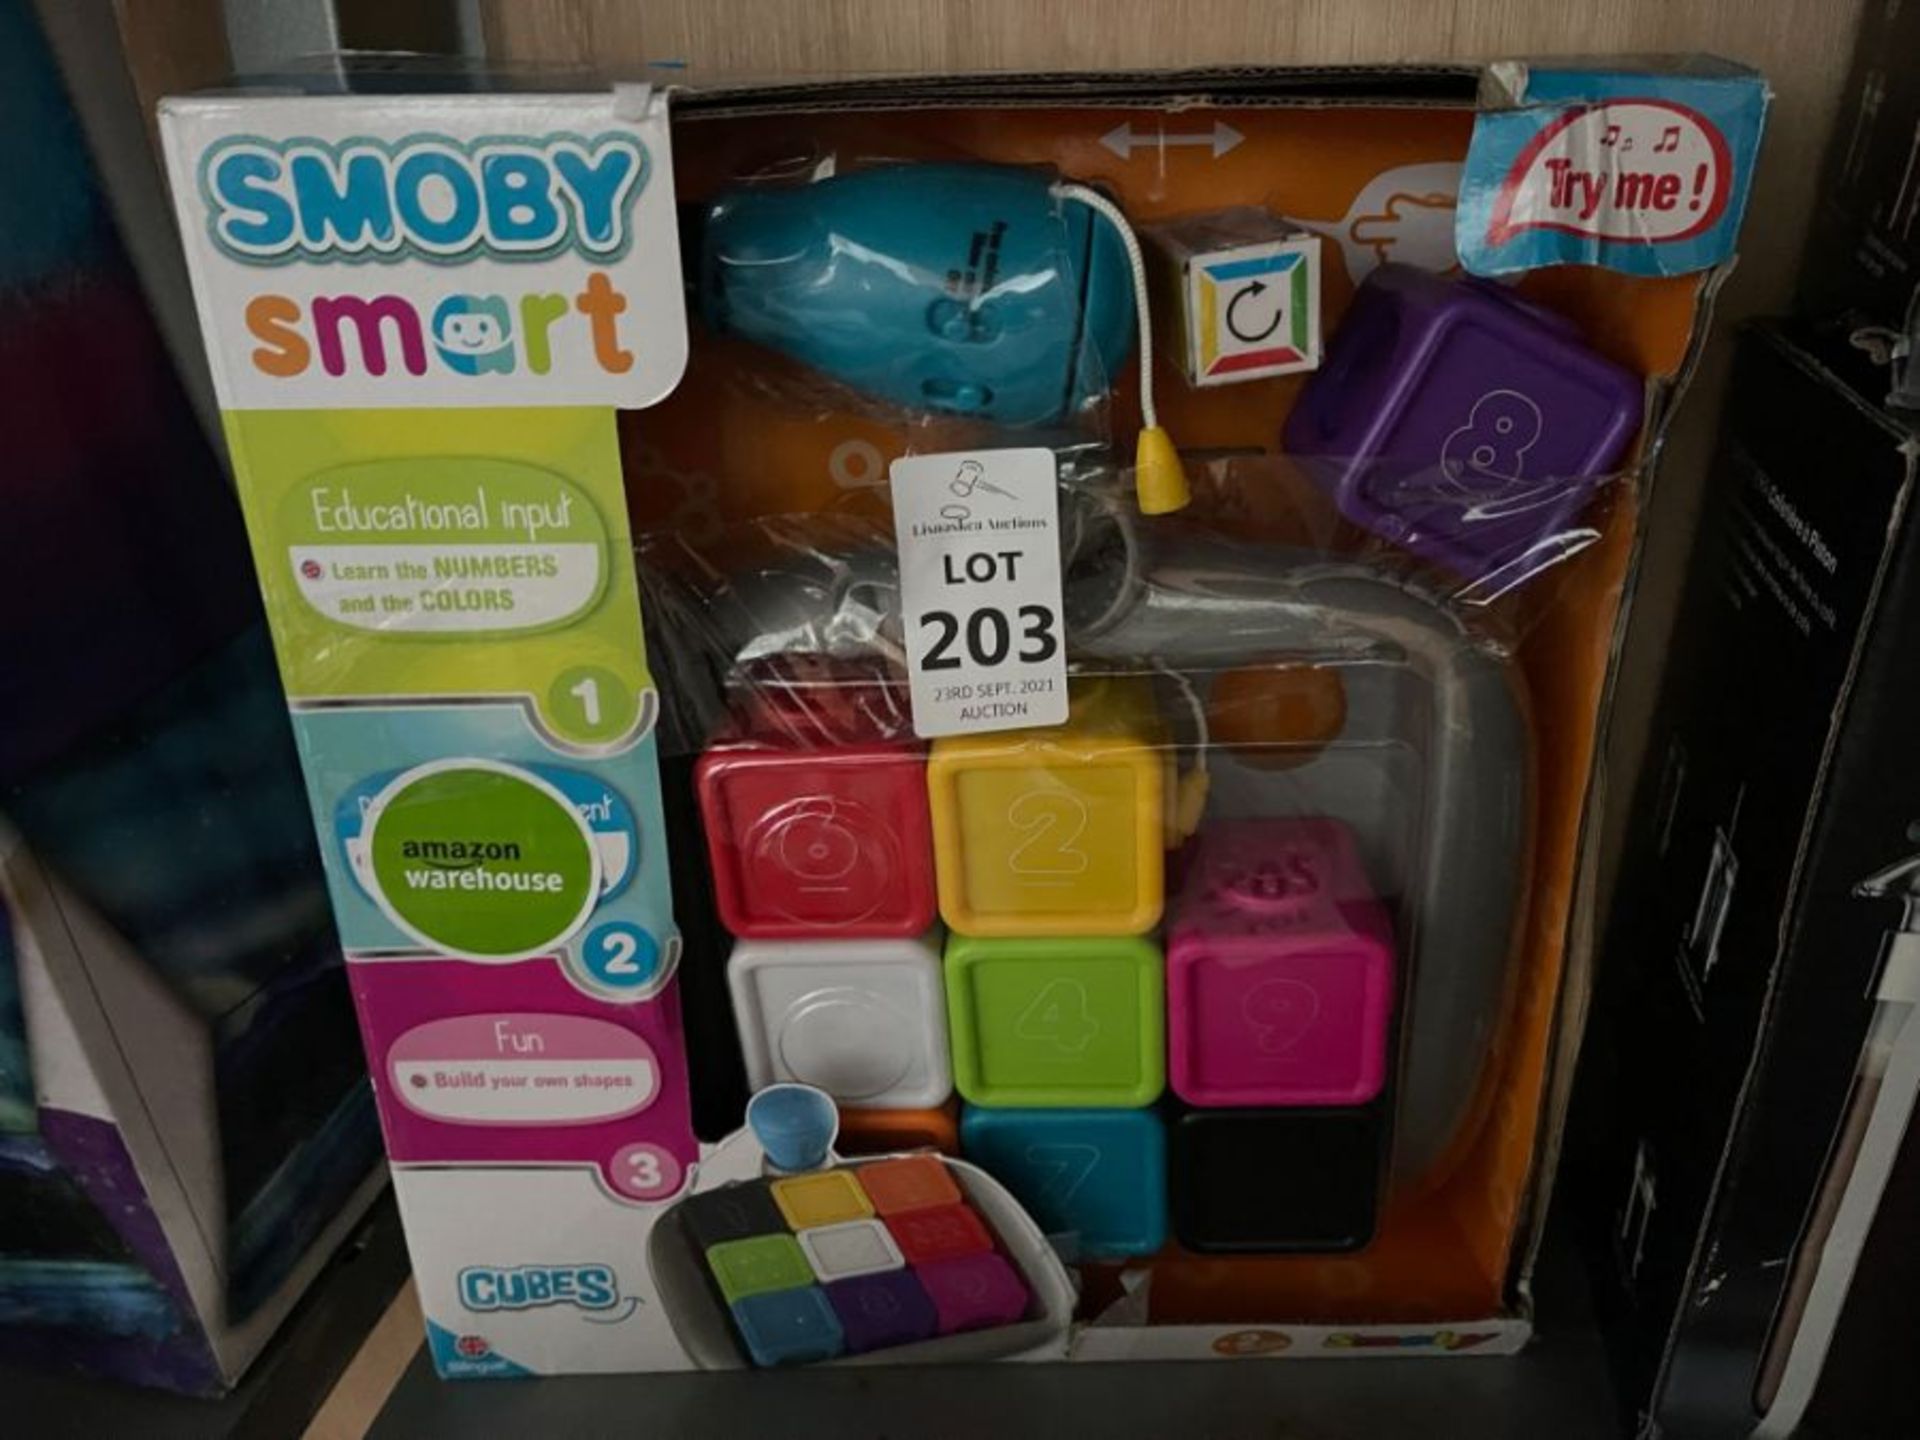 SMOBY SMART EDUCATIONAL CUBES GAME